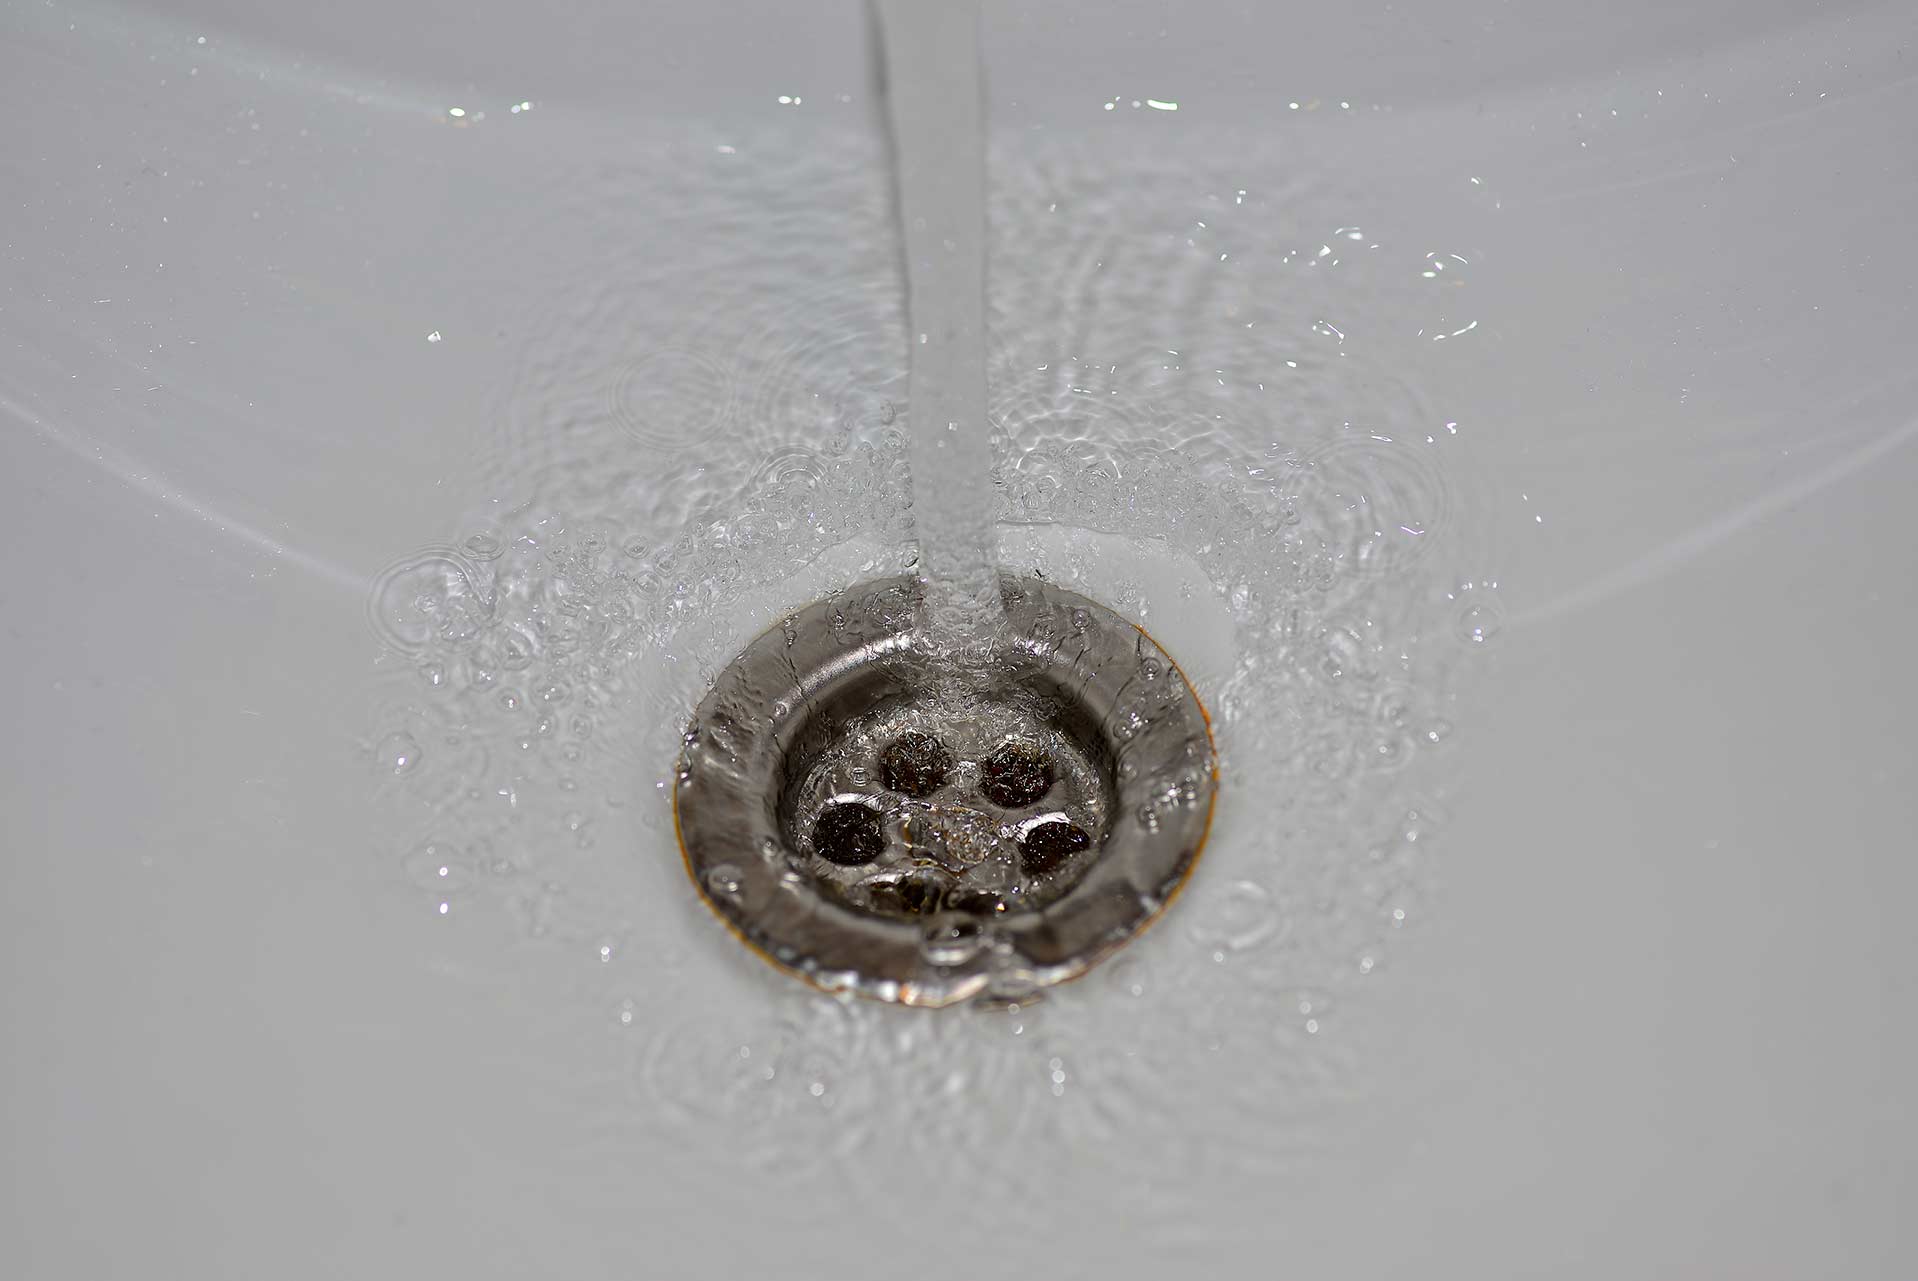 A2B Drains provides services to unblock blocked sinks and drains for properties in Stoke.